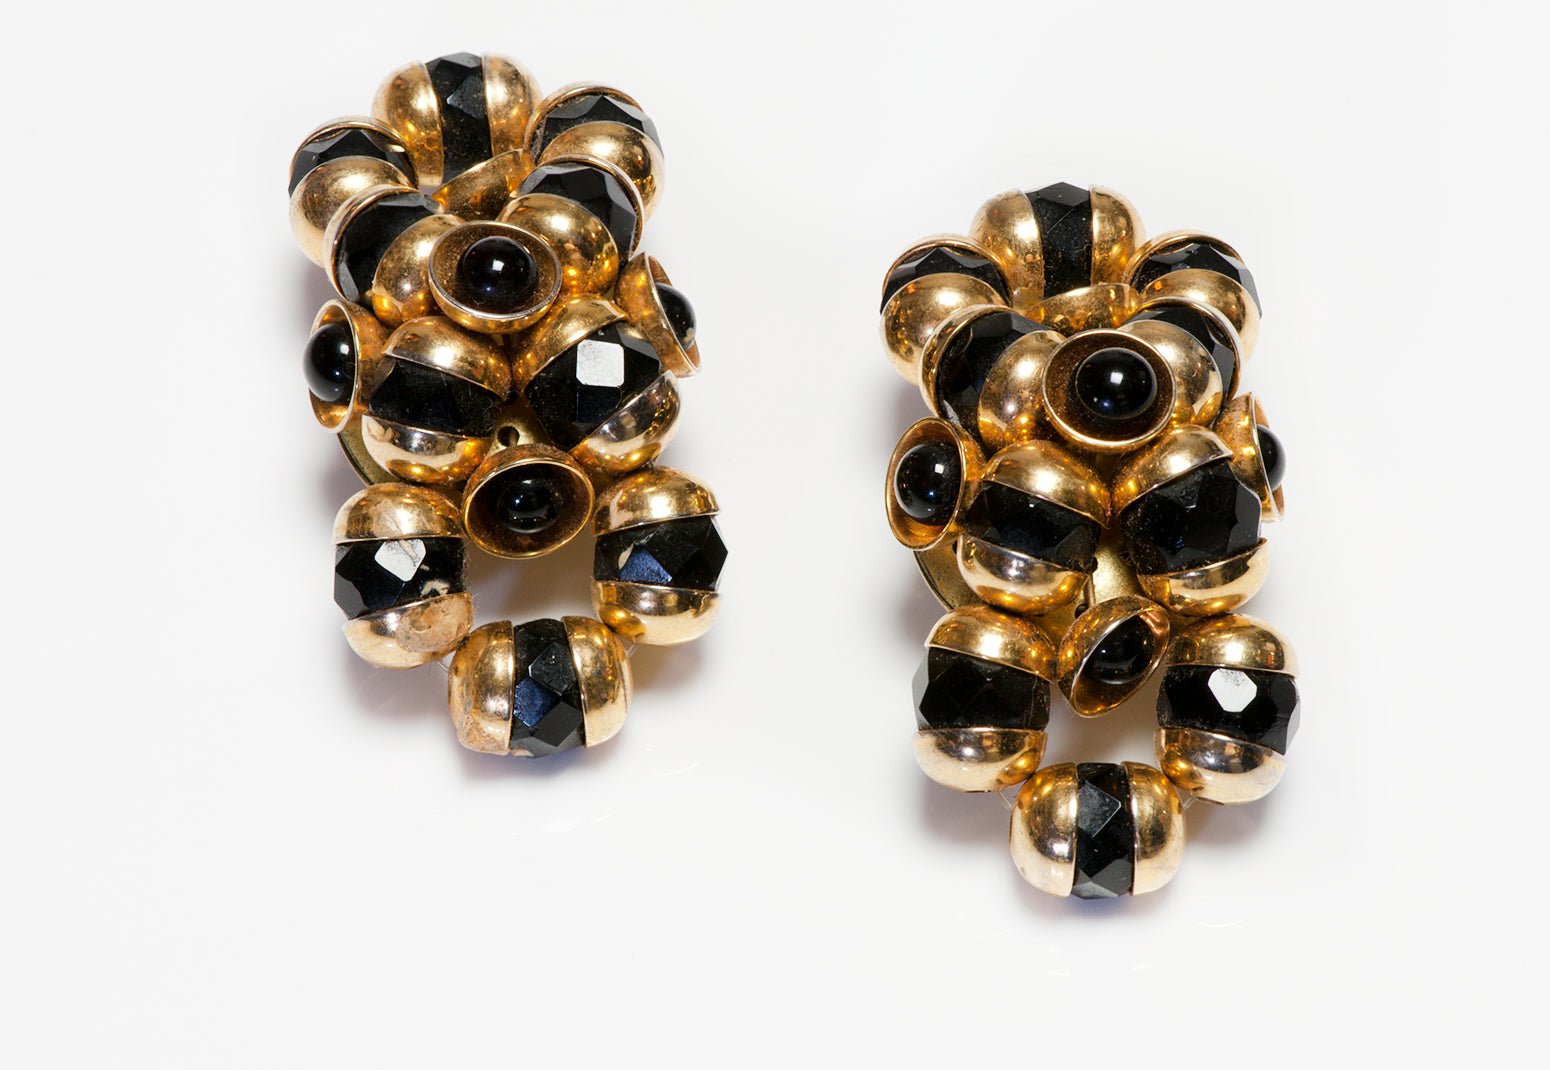 Francoise Montague Paris 1950’s Black Crystal Glass Beads Earrings - DSF Antique Jewelry